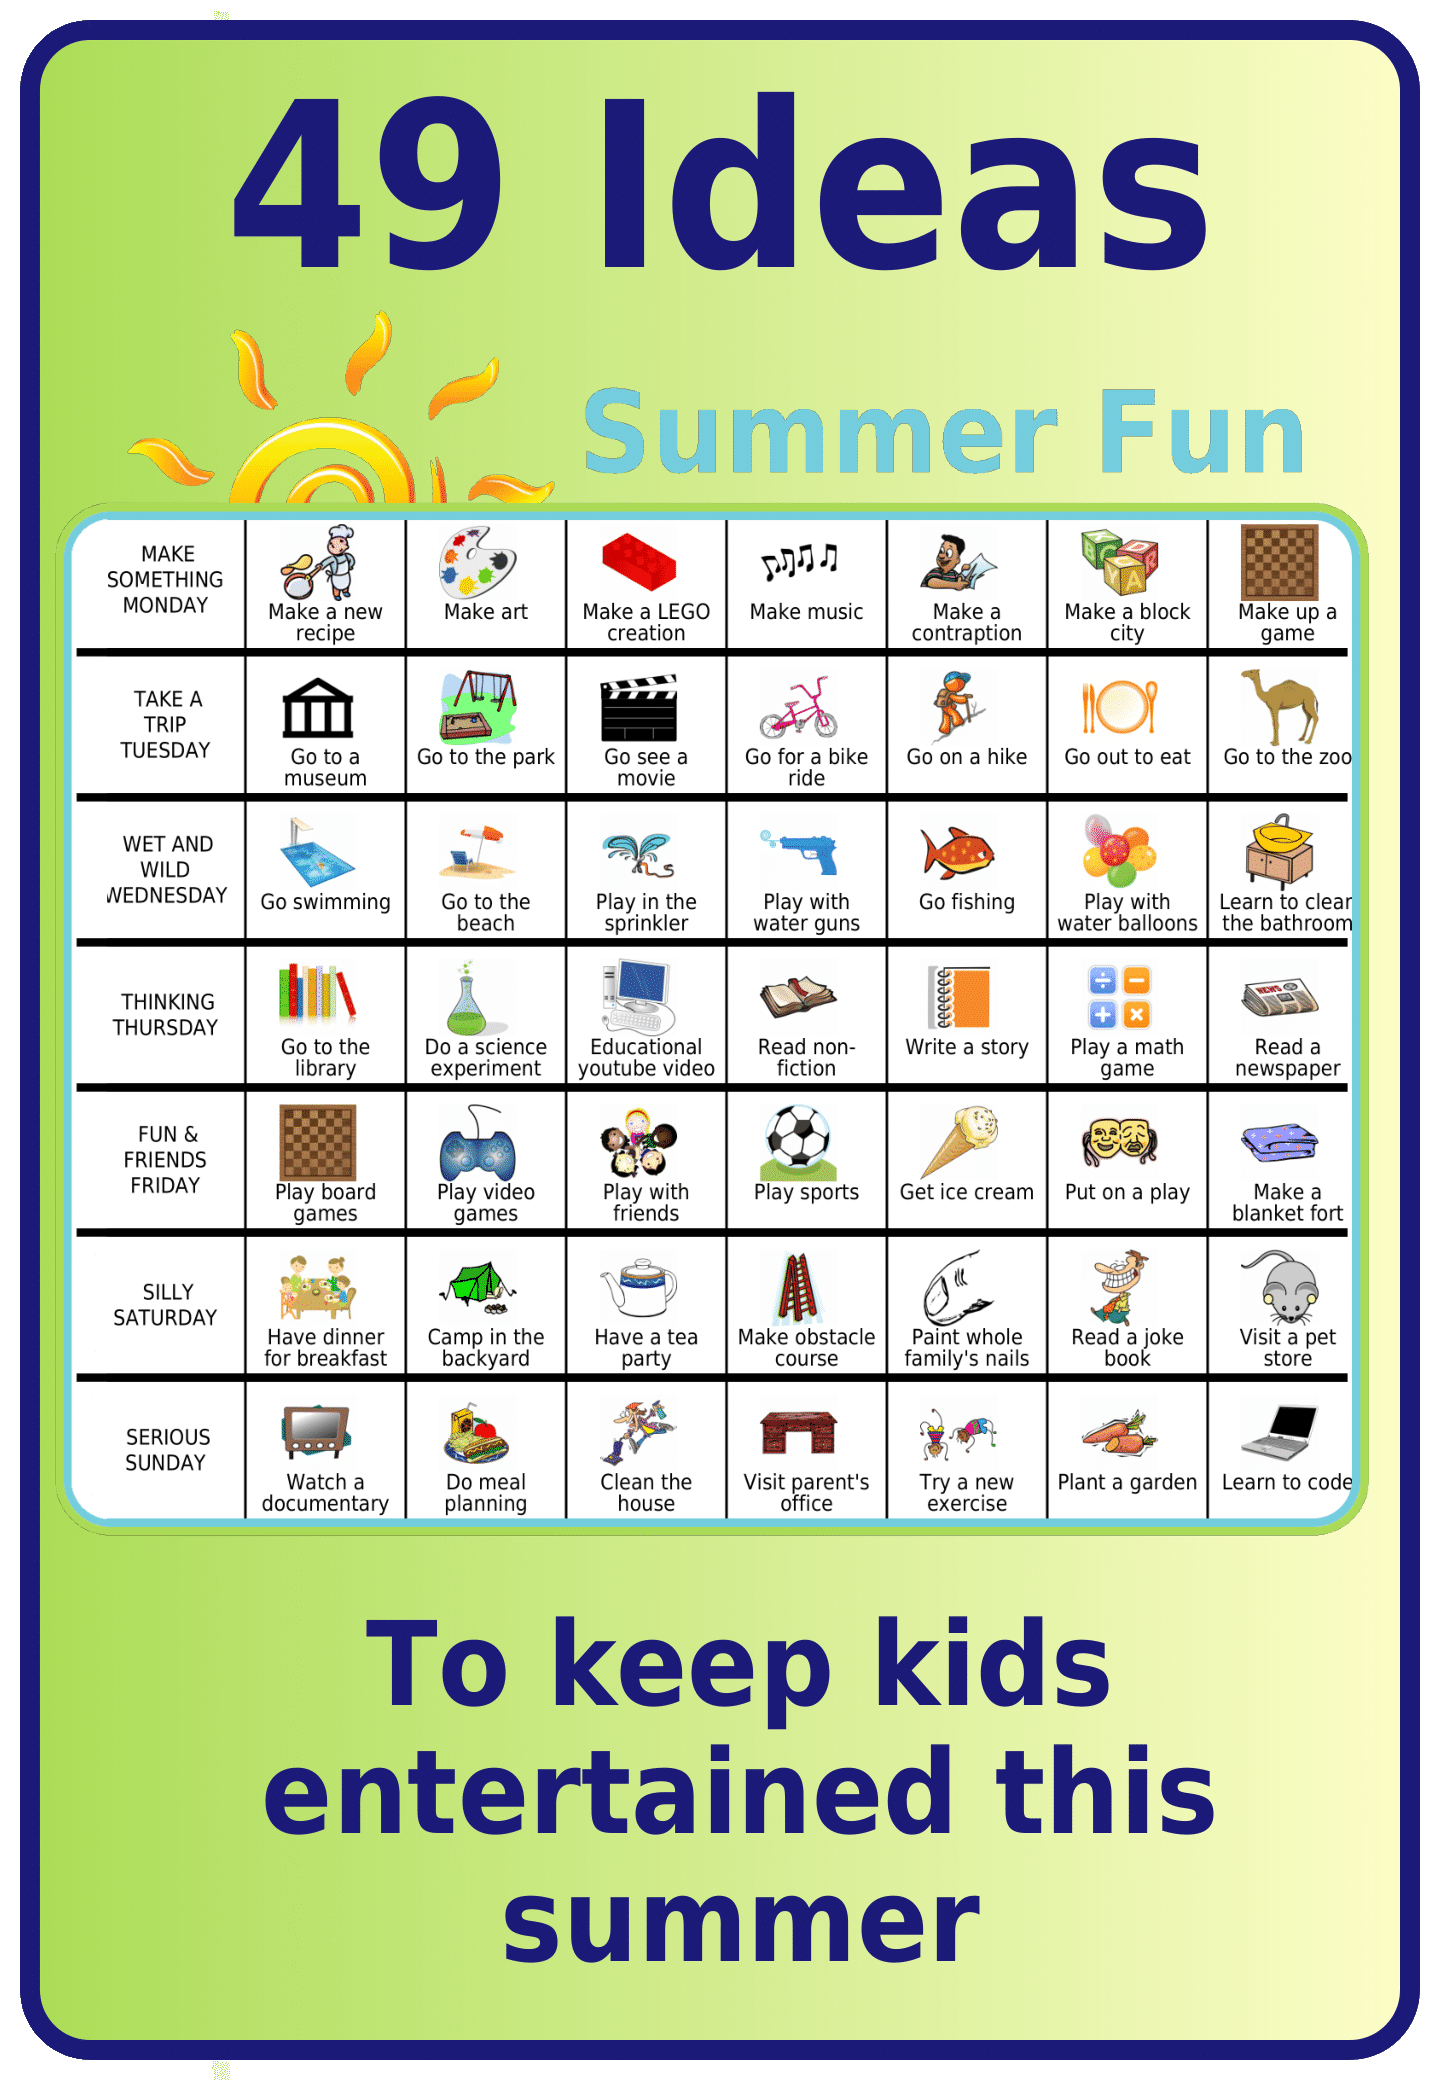 A grid of 7 ideas for each day of the week, totalling 49 summer fun activities